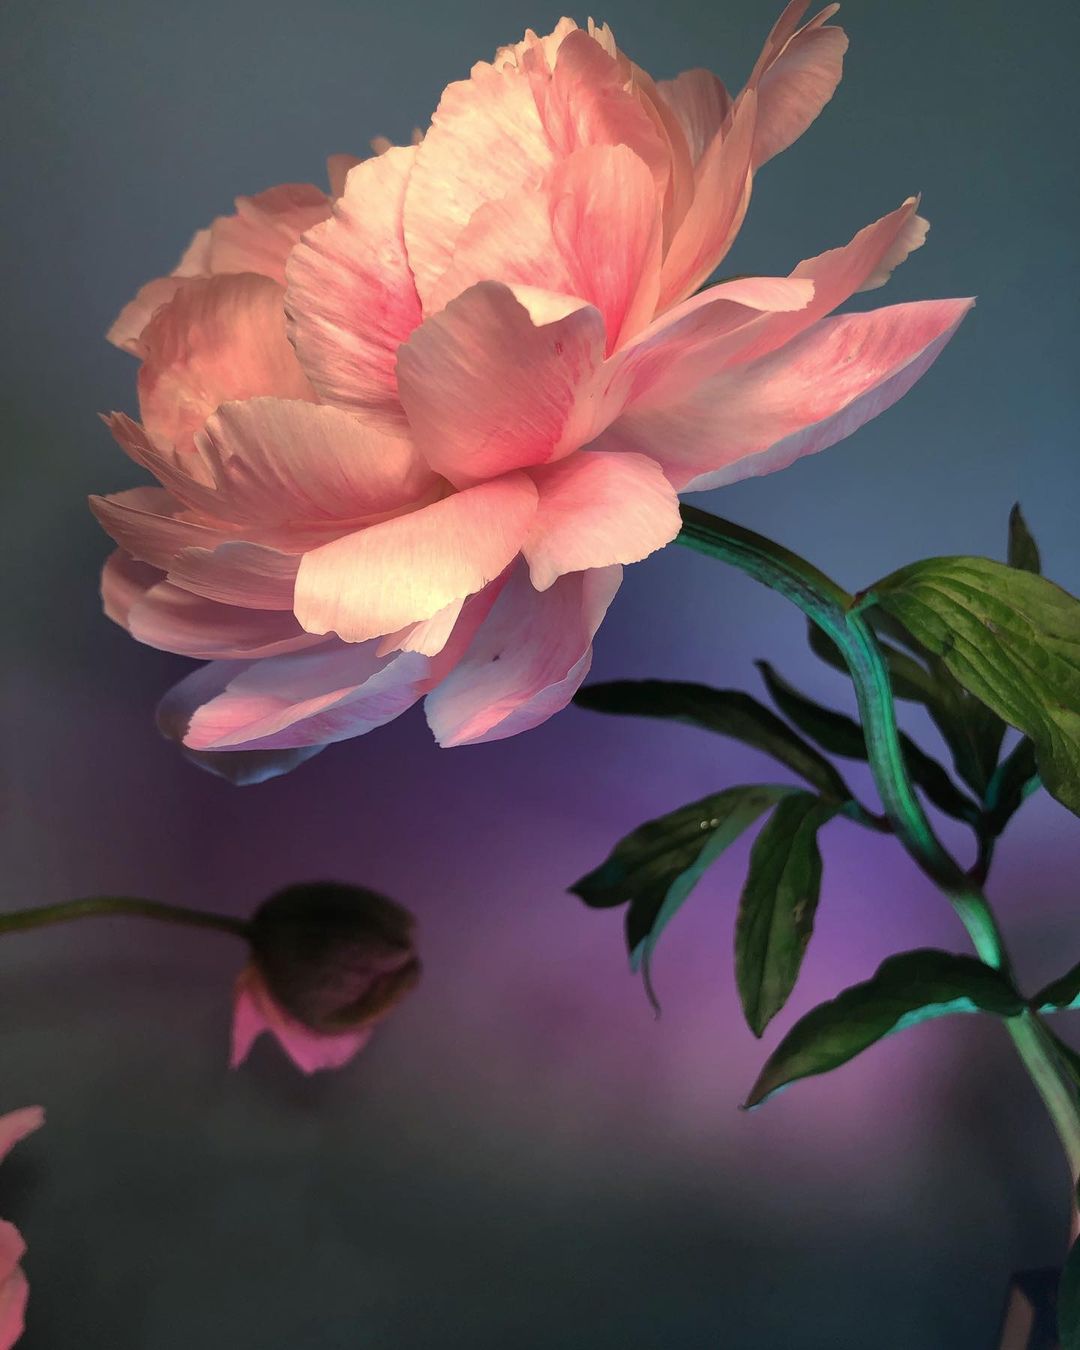 Doan Ly Has a Knack For Capturing the Ethereal Beauty of Flowers Floral Art